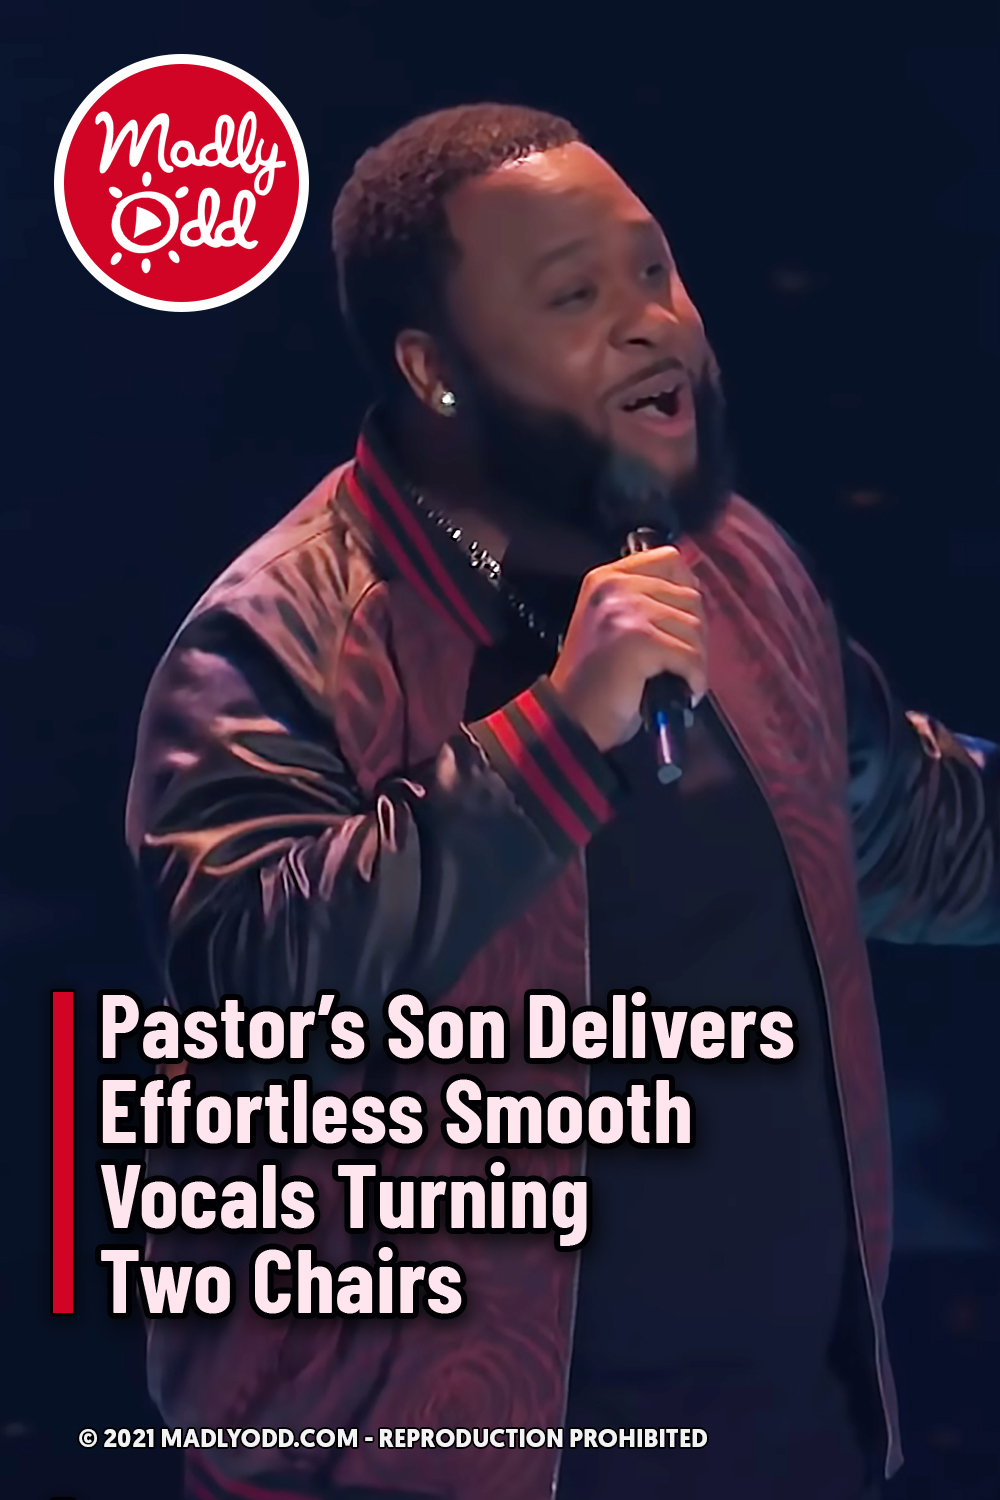 Pastor’s Son Delivers Effortless Smooth Vocals Turning Two Chairs